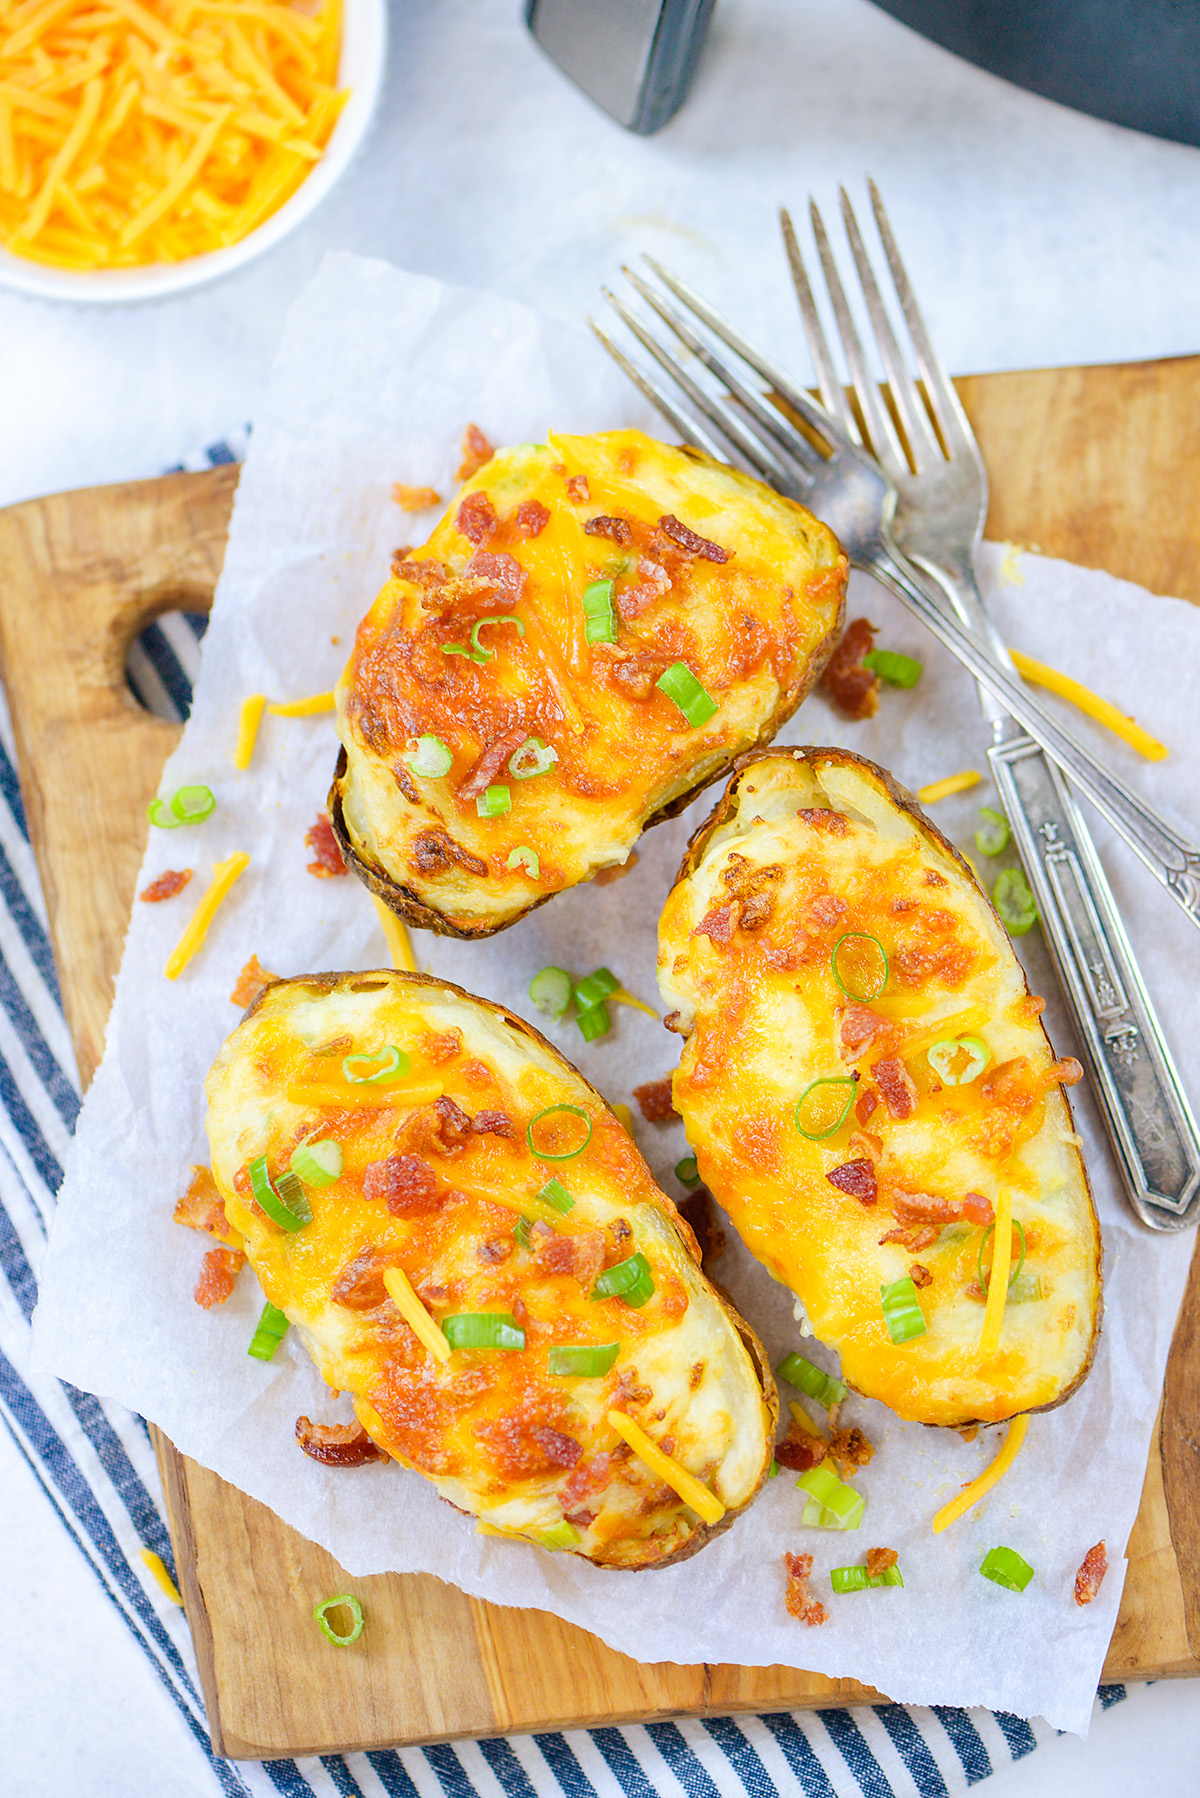 Three twice baked potatoes with two forks.